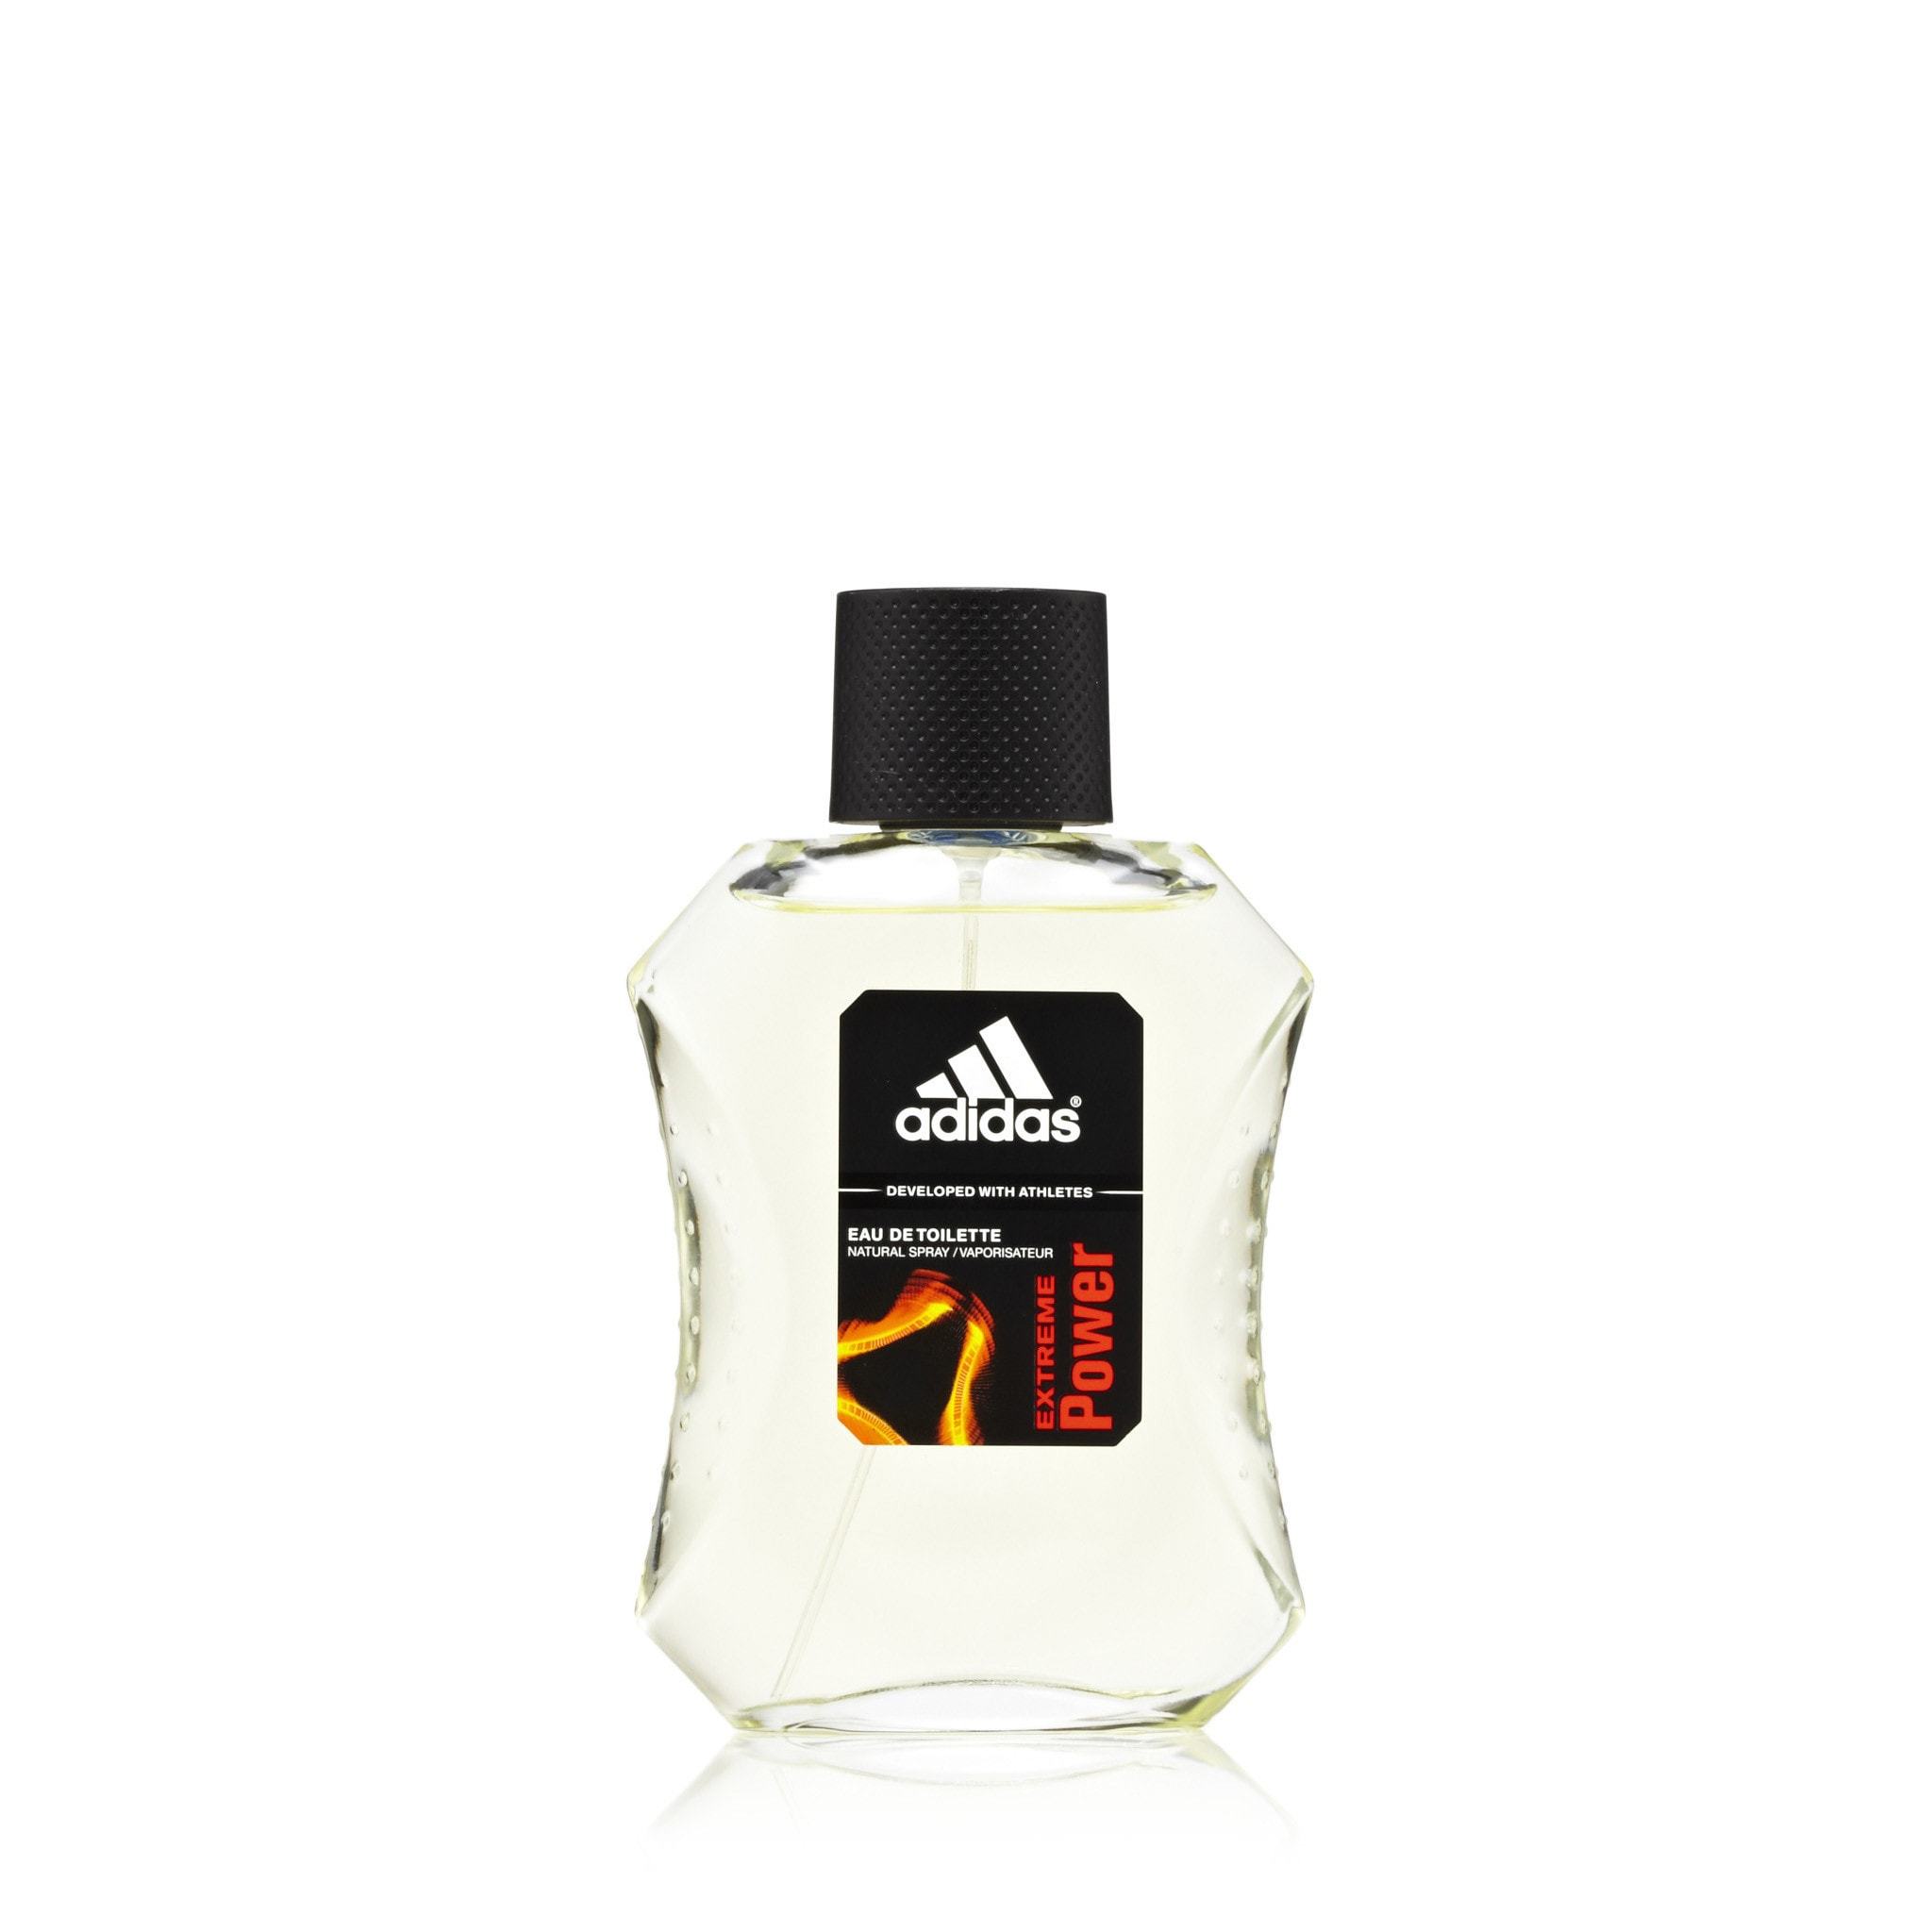 Extreme Power EDT for Men by Adidas Fragrance Outlet